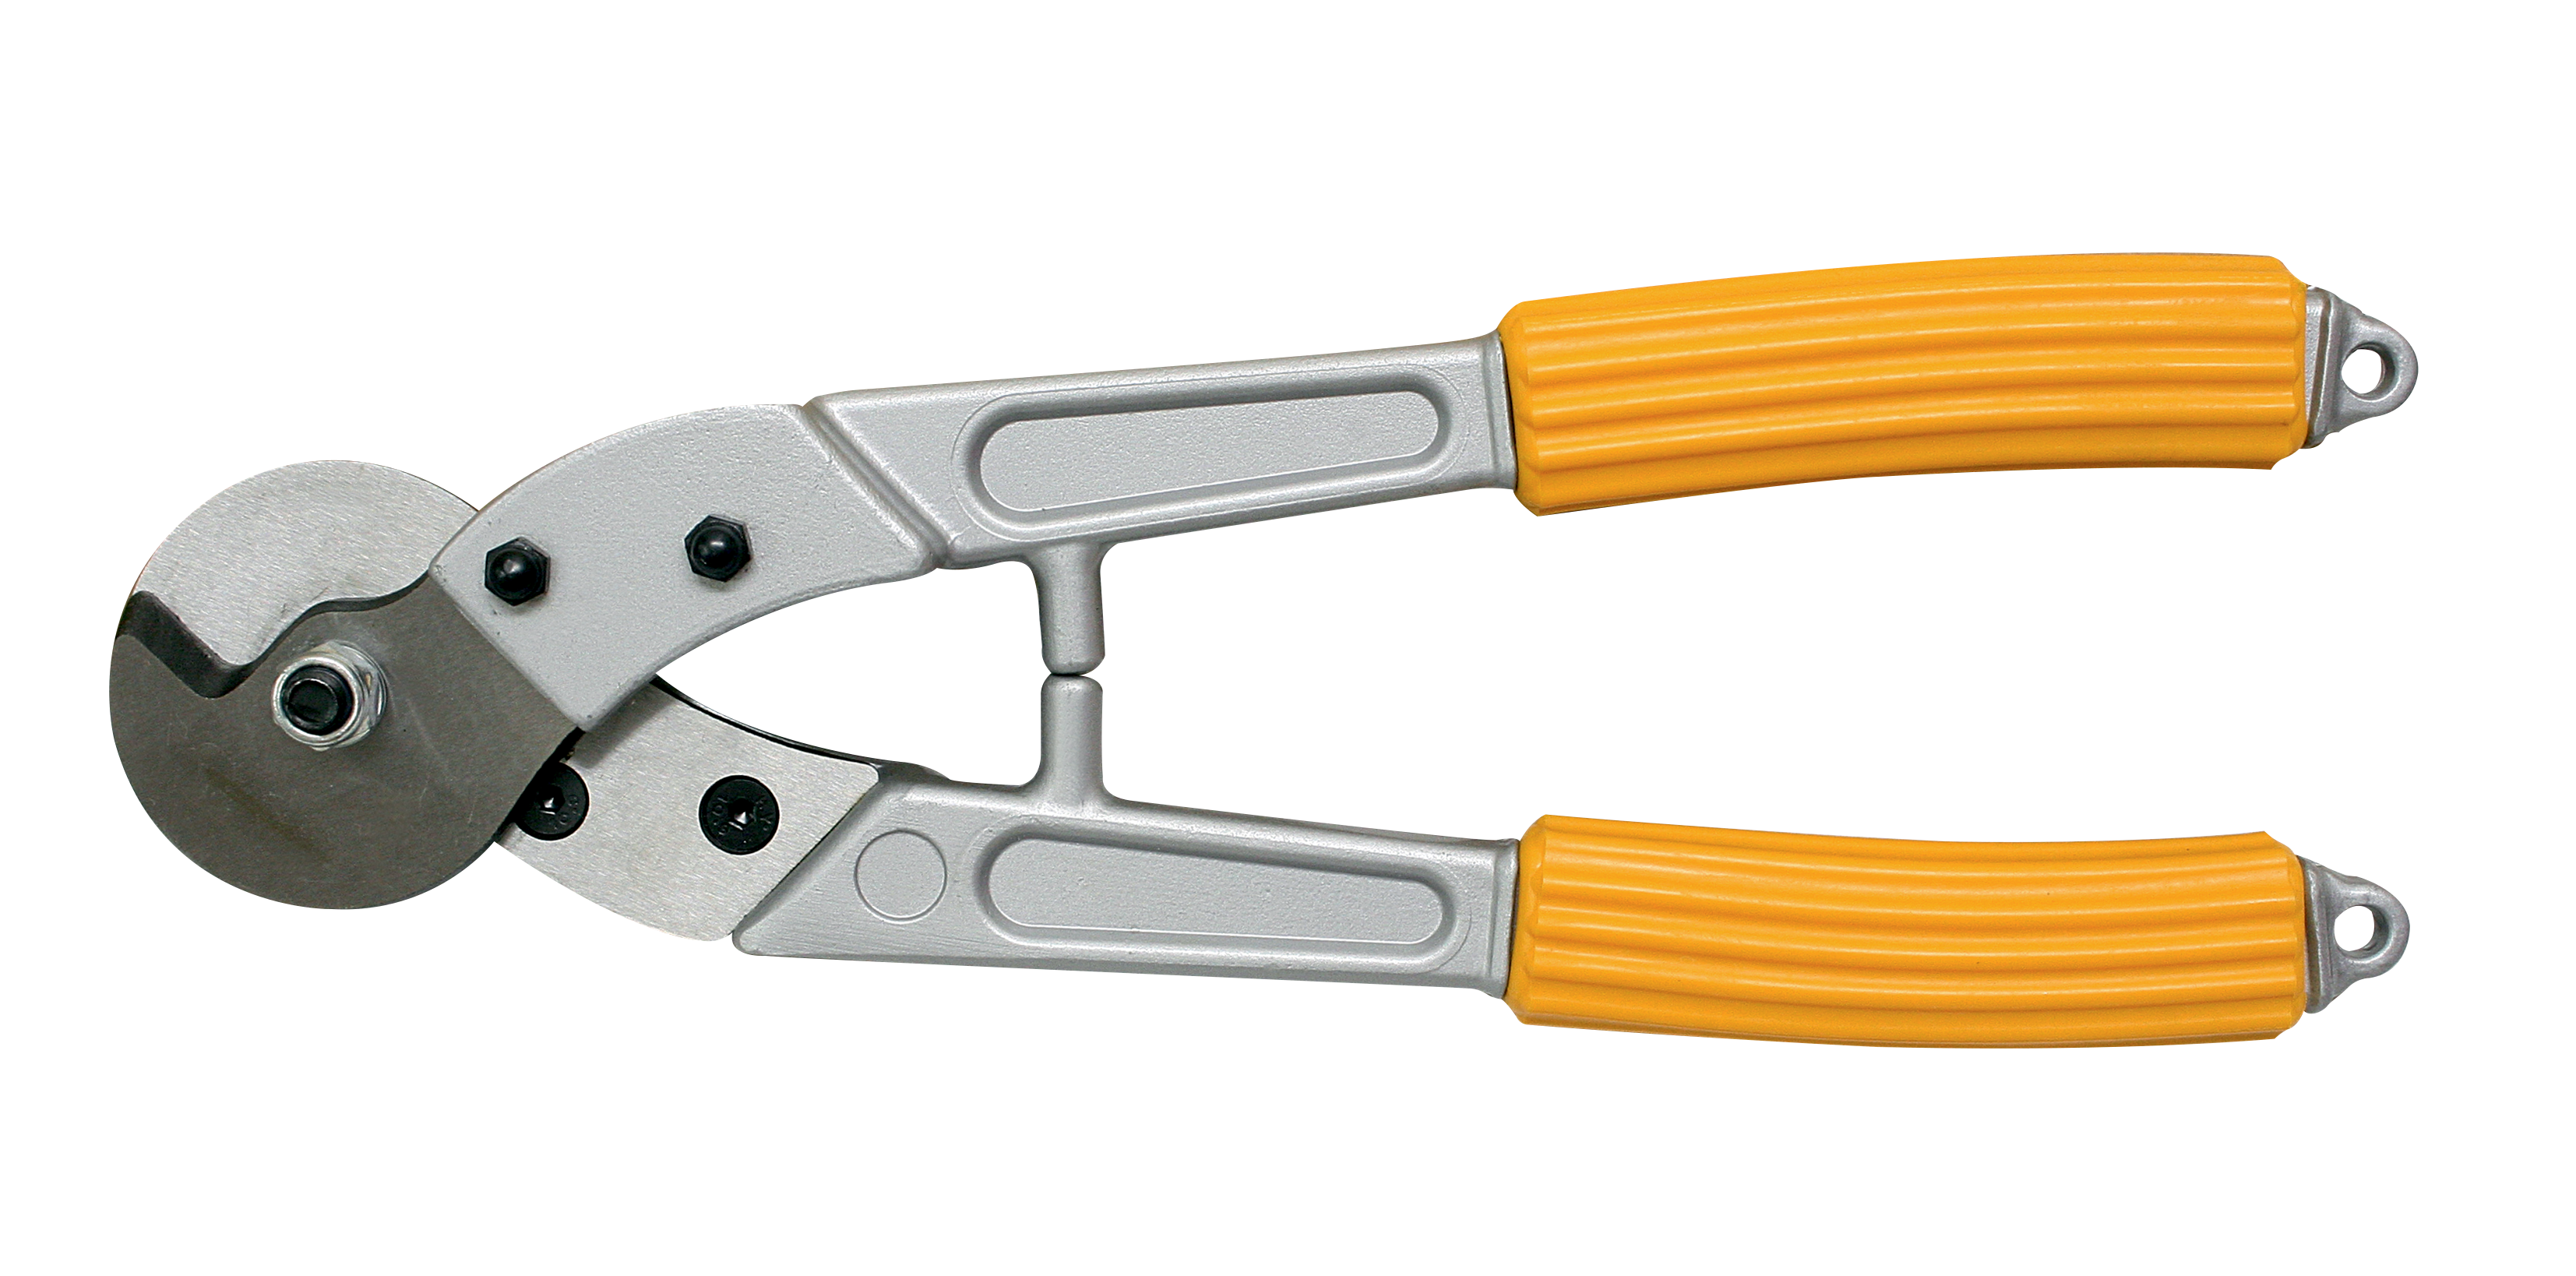 CABLE CUTTER UP TO 60mm2